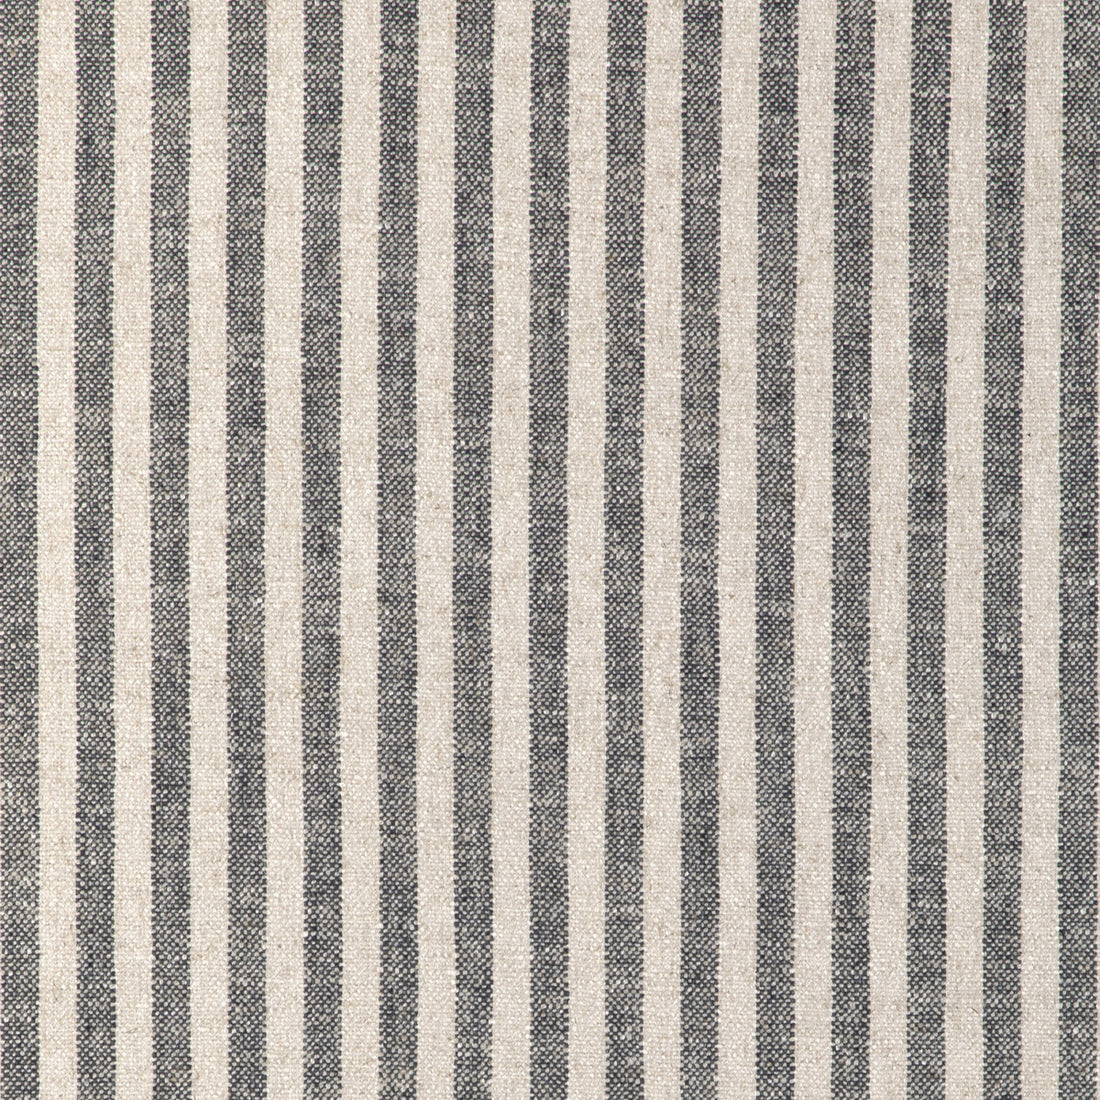 Kravet Design fabric in 37115-11 color - pattern 37115.11.0 - by Kravet Design in the Woven Colors collection